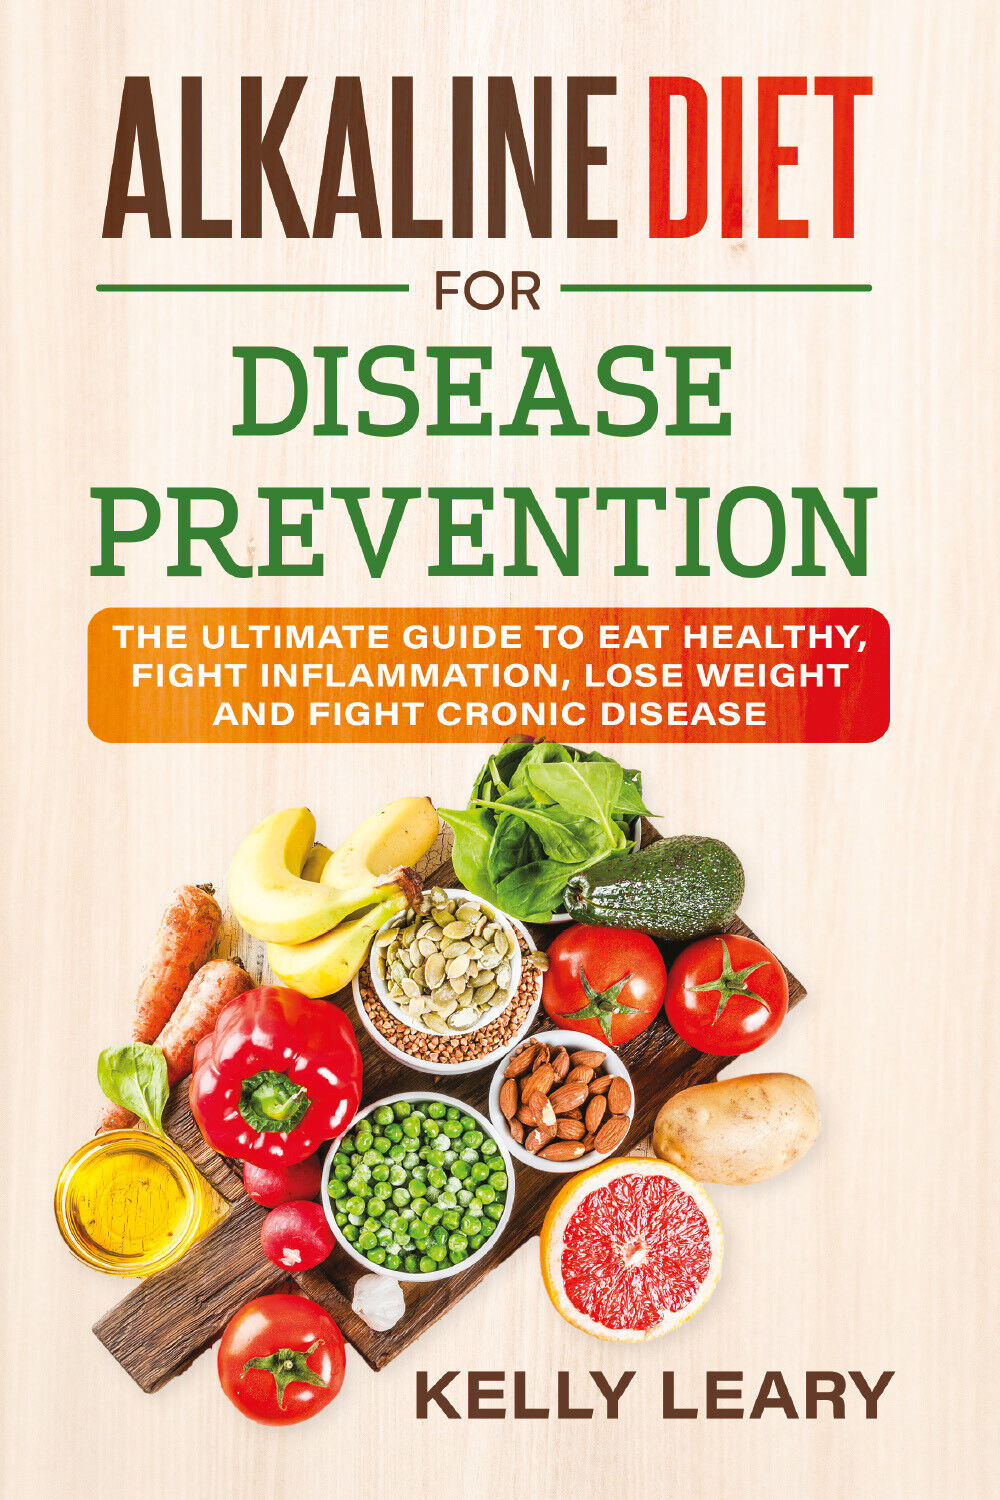 ALKALINE DIET FOR DISEASE PREVENTION. The Ultimate Guide to Eat Healthy, Fight I libro usato